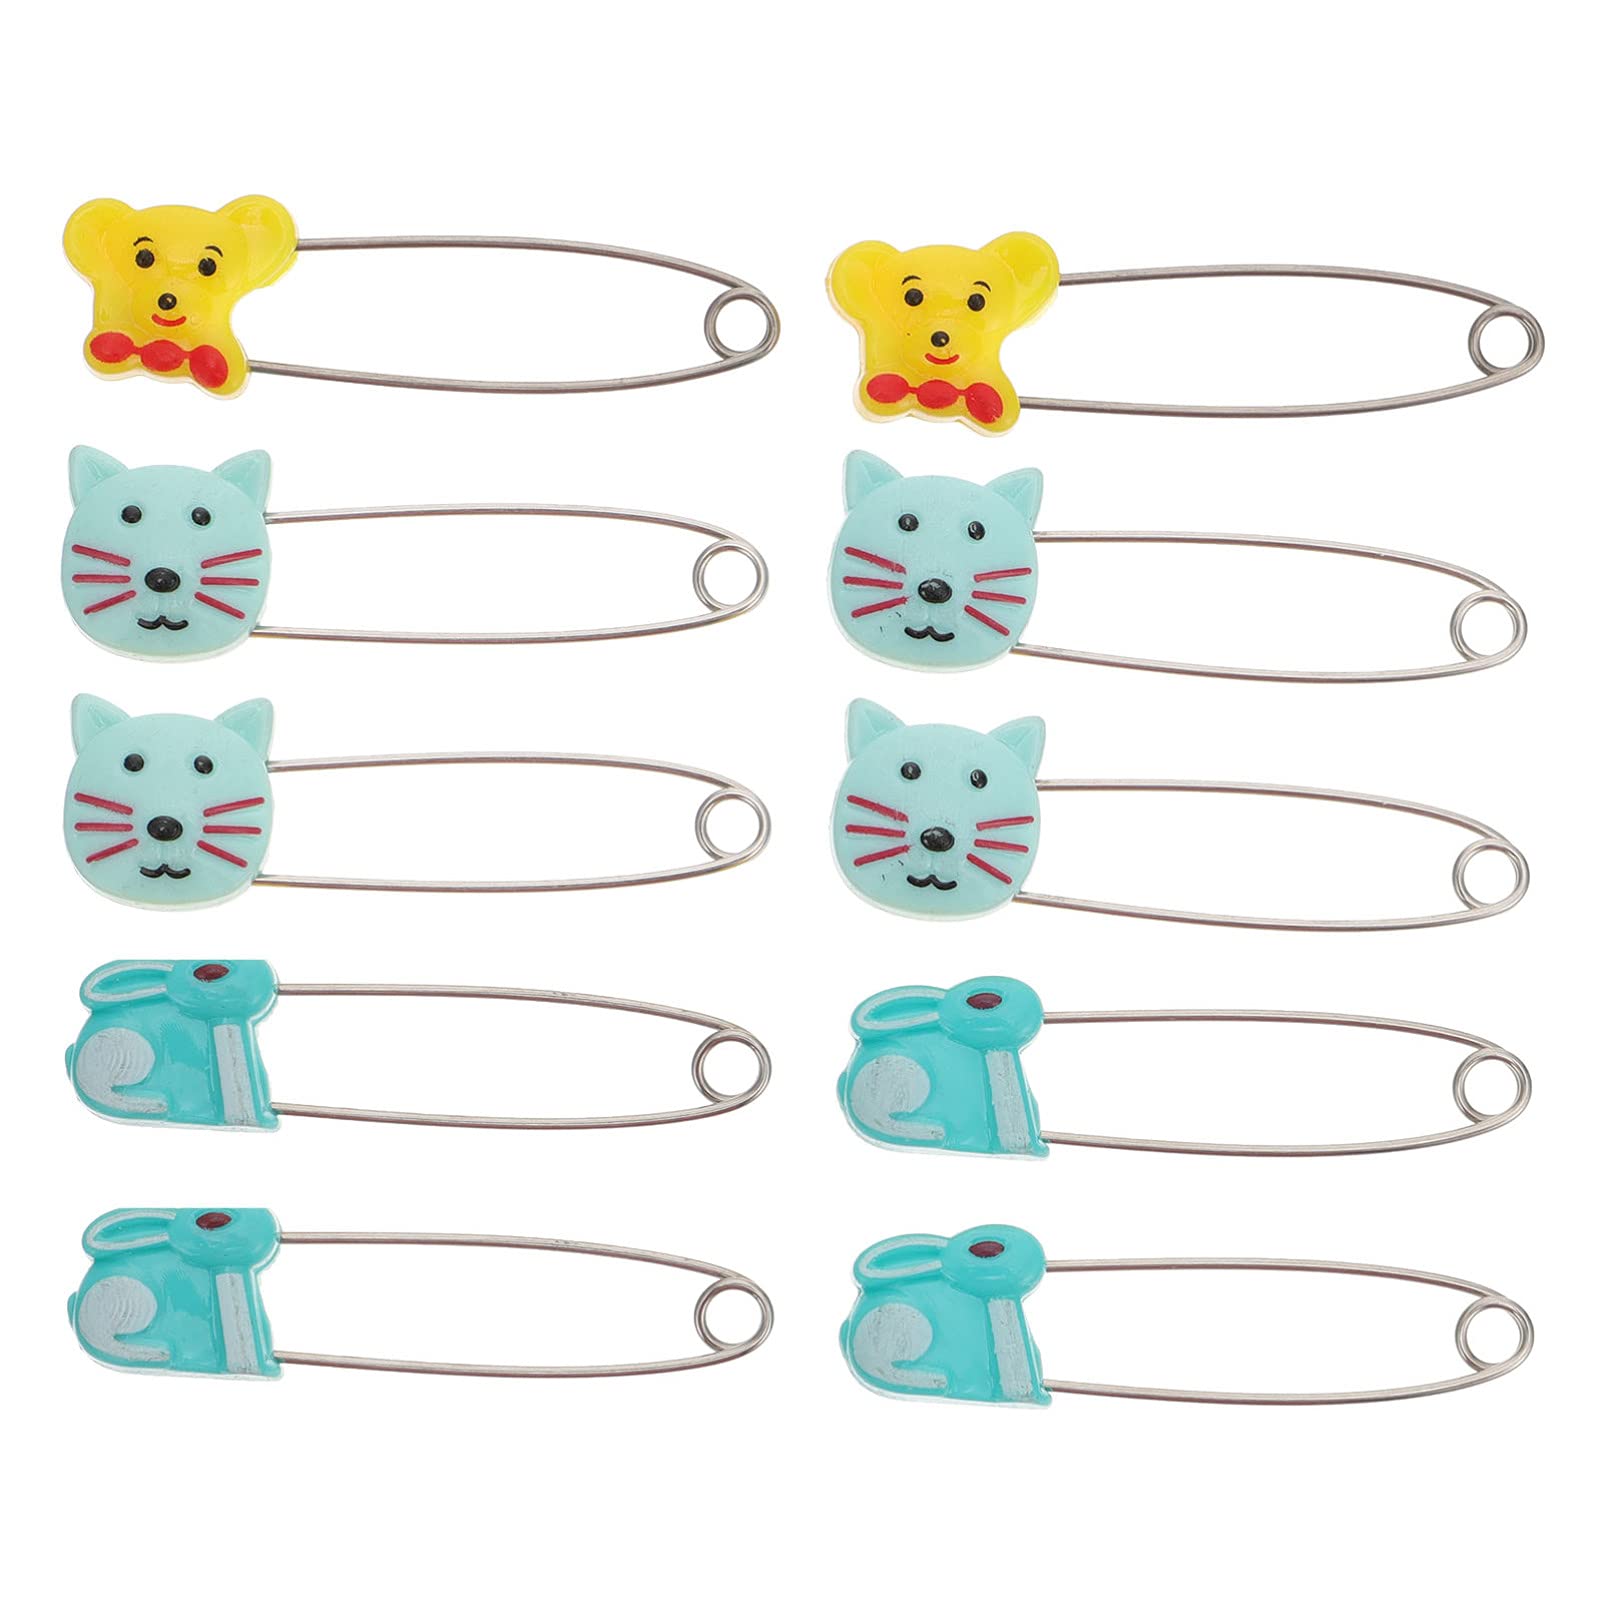 Toddmomy 10pcs Animal Safety Pins Stainless Steel Diaper Pins with